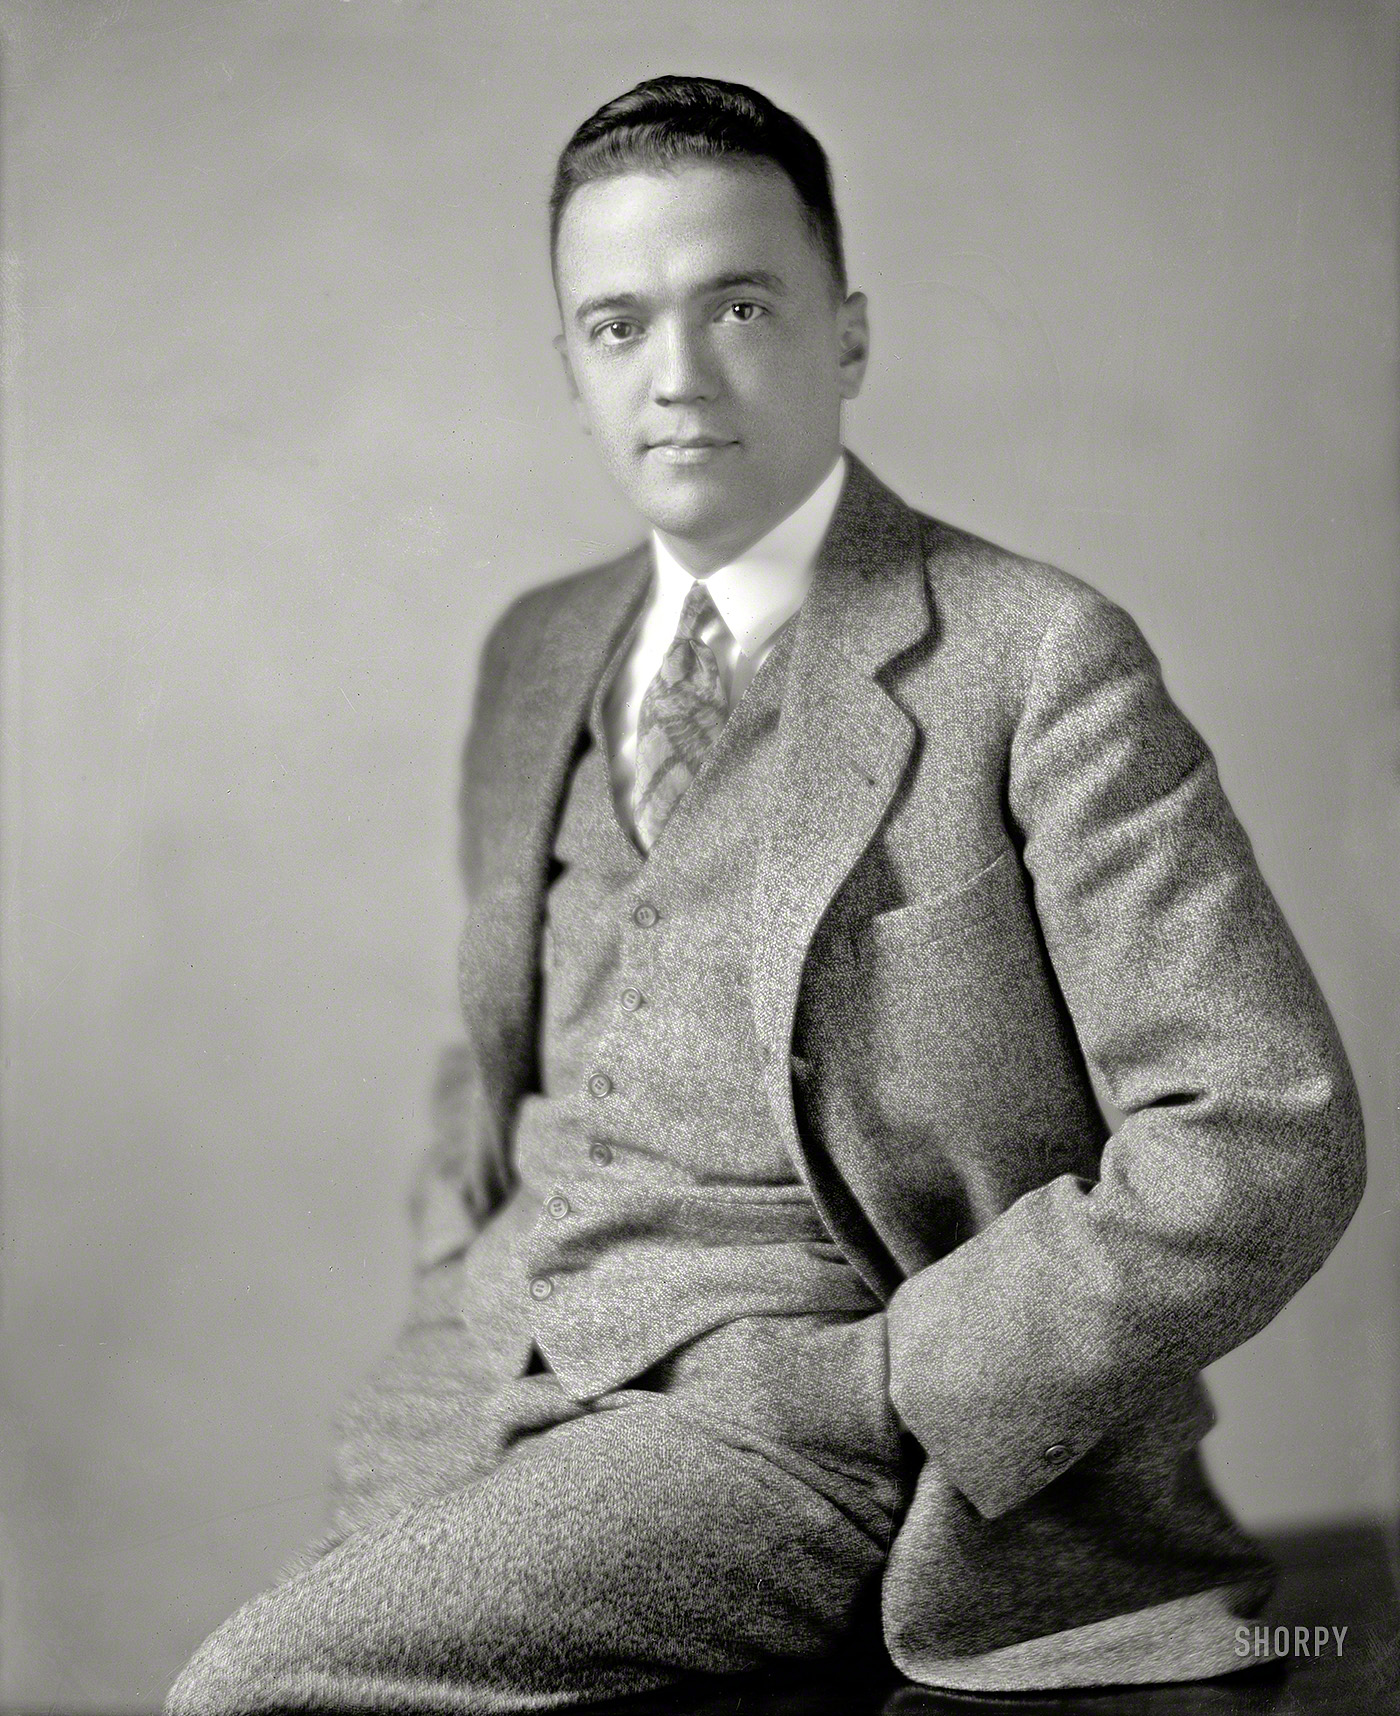 Washington, D.C., circa 1917. "Hoover, John Edgar." The future head of the FBI in his early 20s. Harris & Ewing Collection glass negative. View full size.